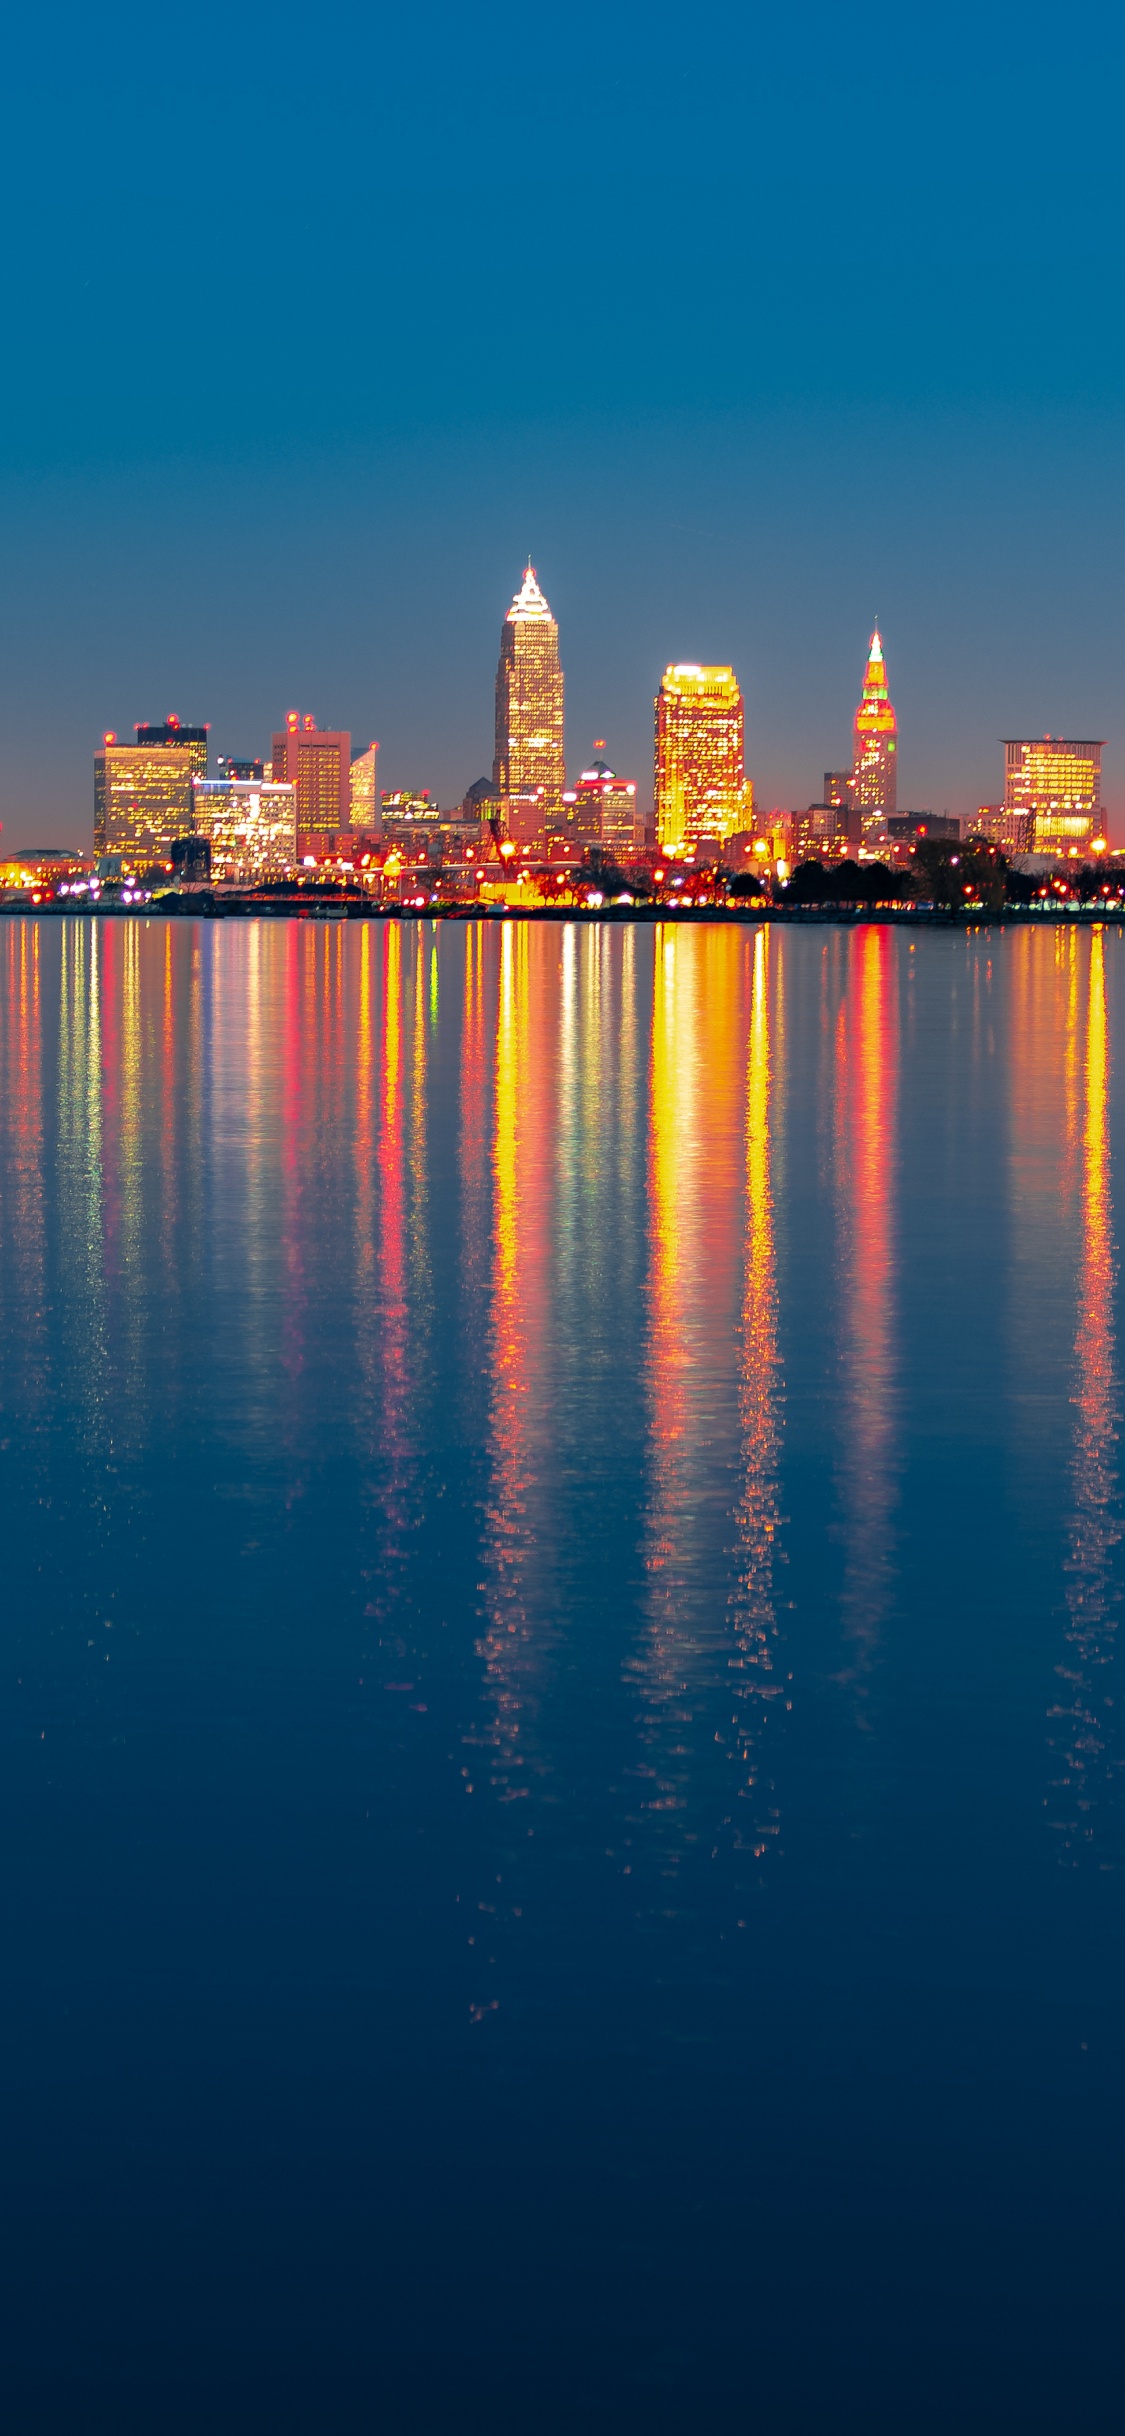 City Skyline Across Body of Water During Night Time. Wallpaper in 1125x2436 Resolution